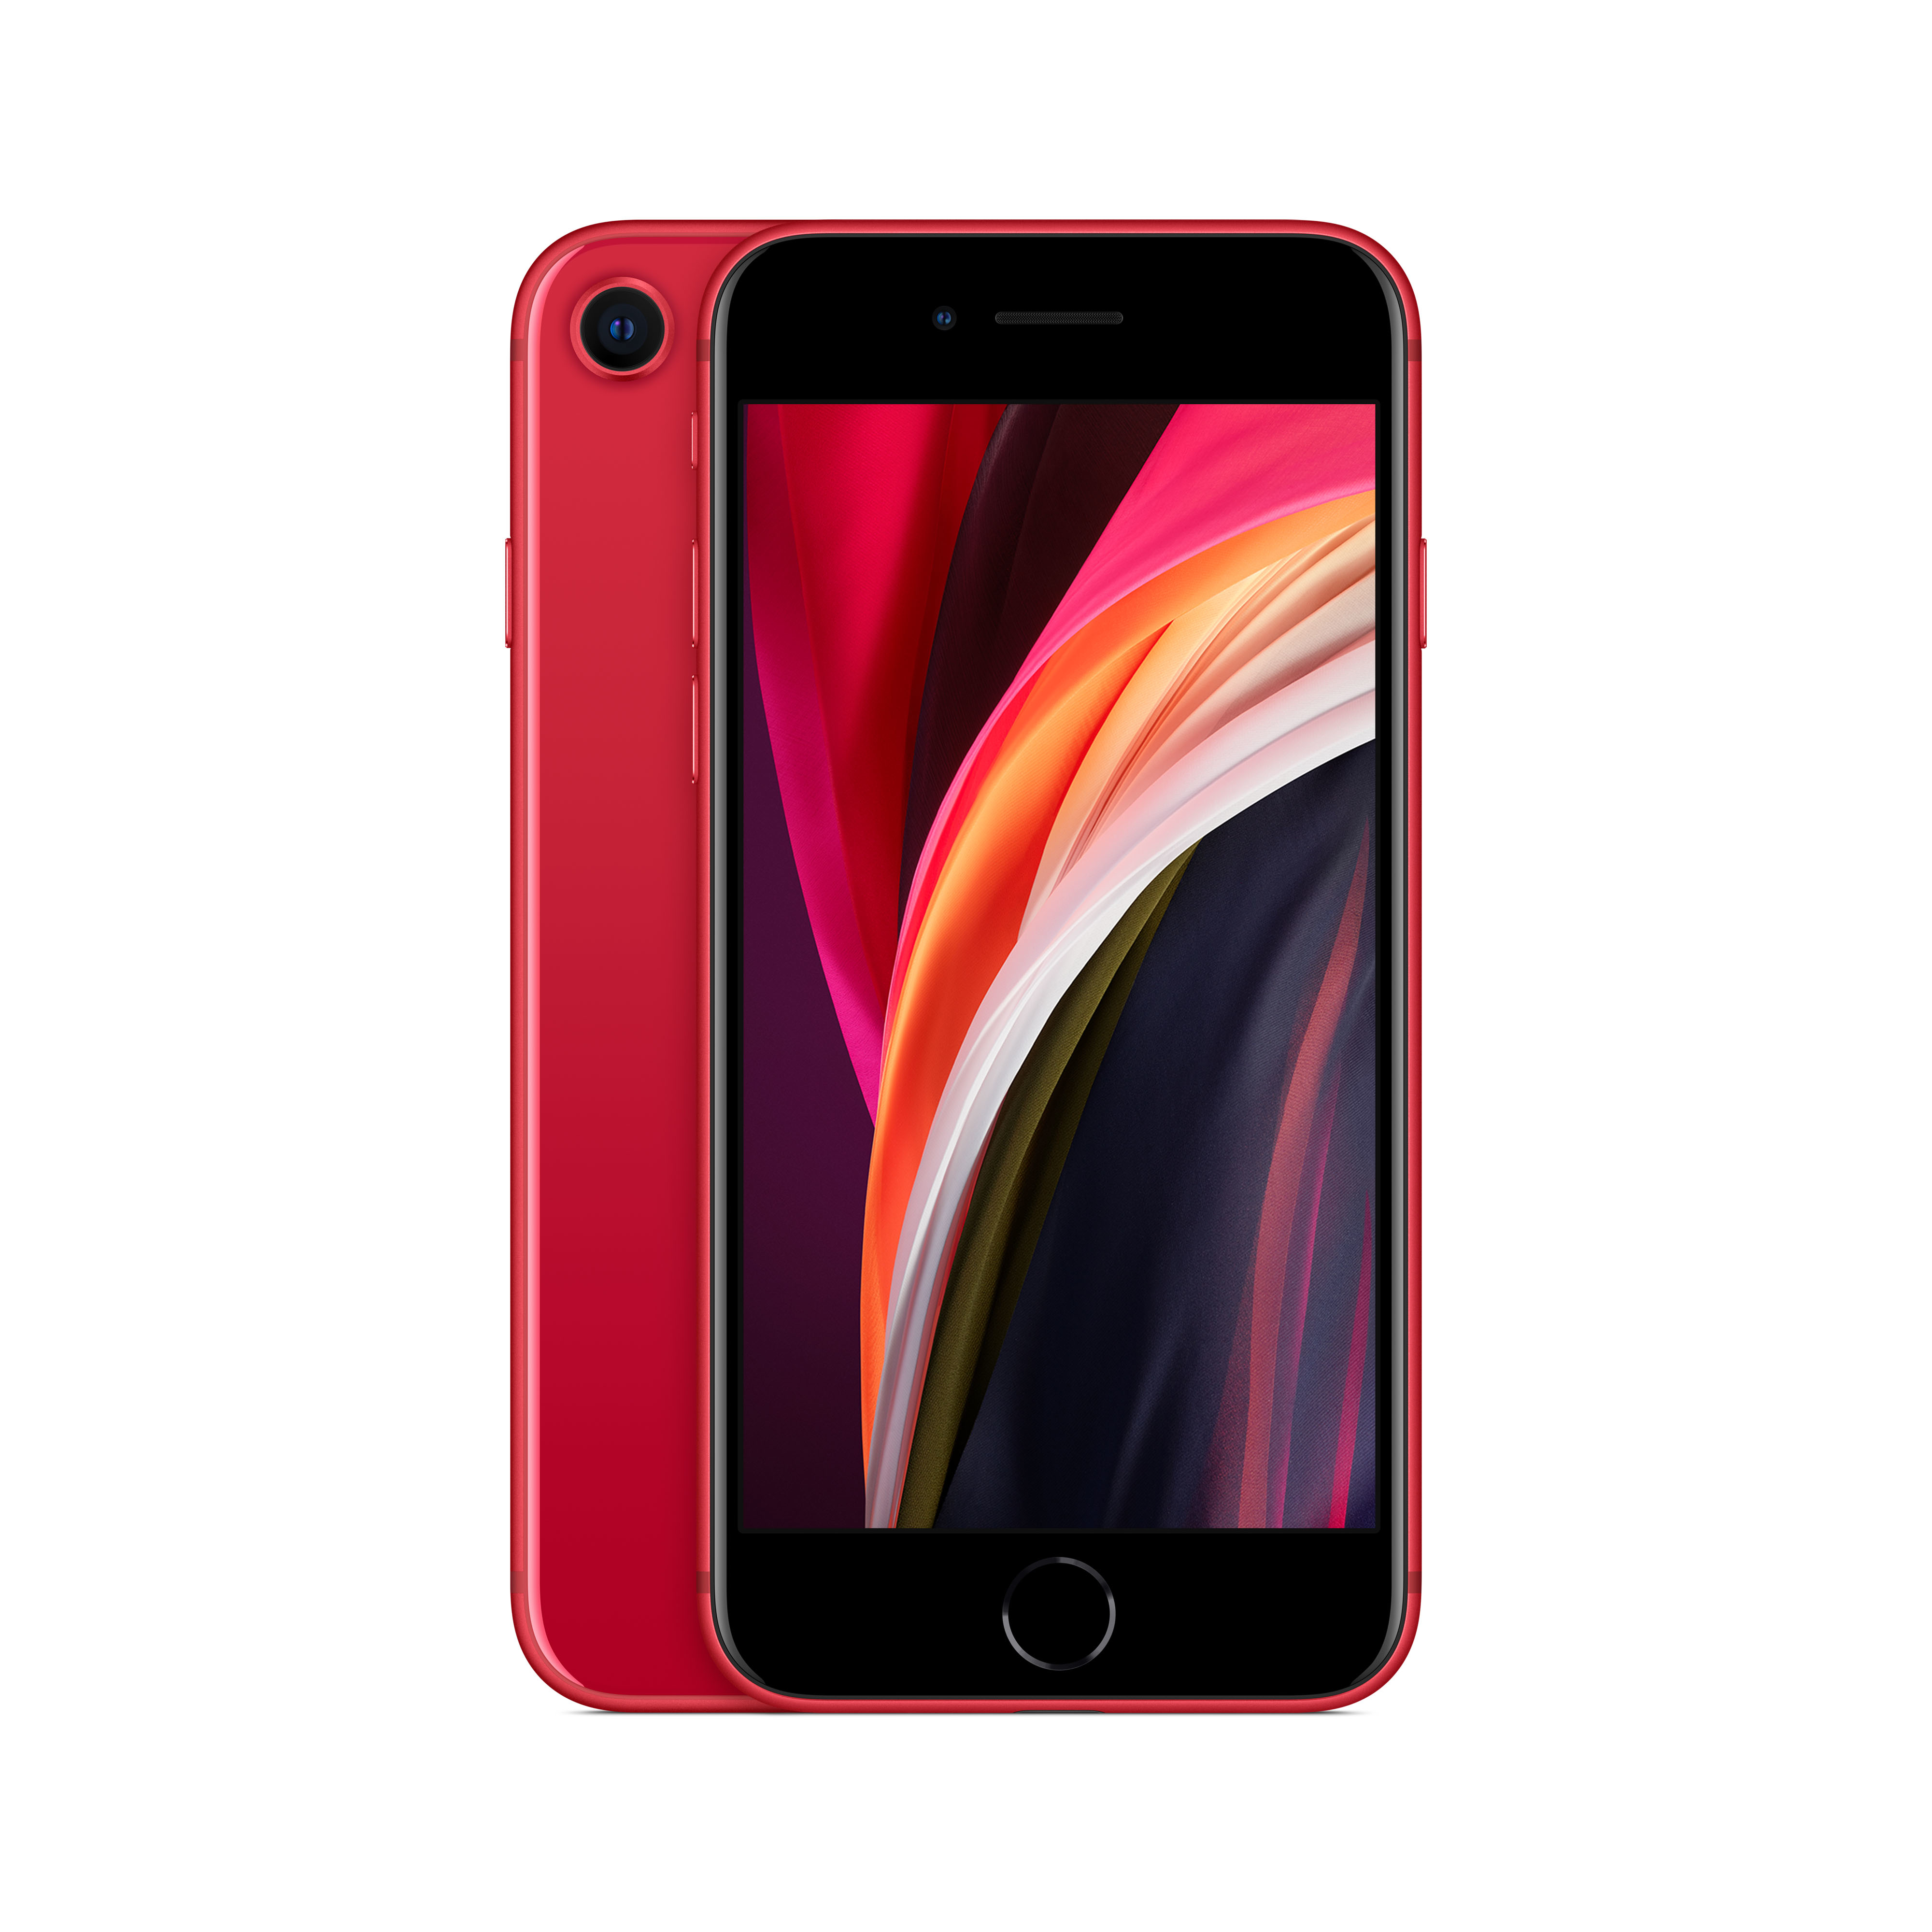 Apple iPhone SE 2 64GB Product Red